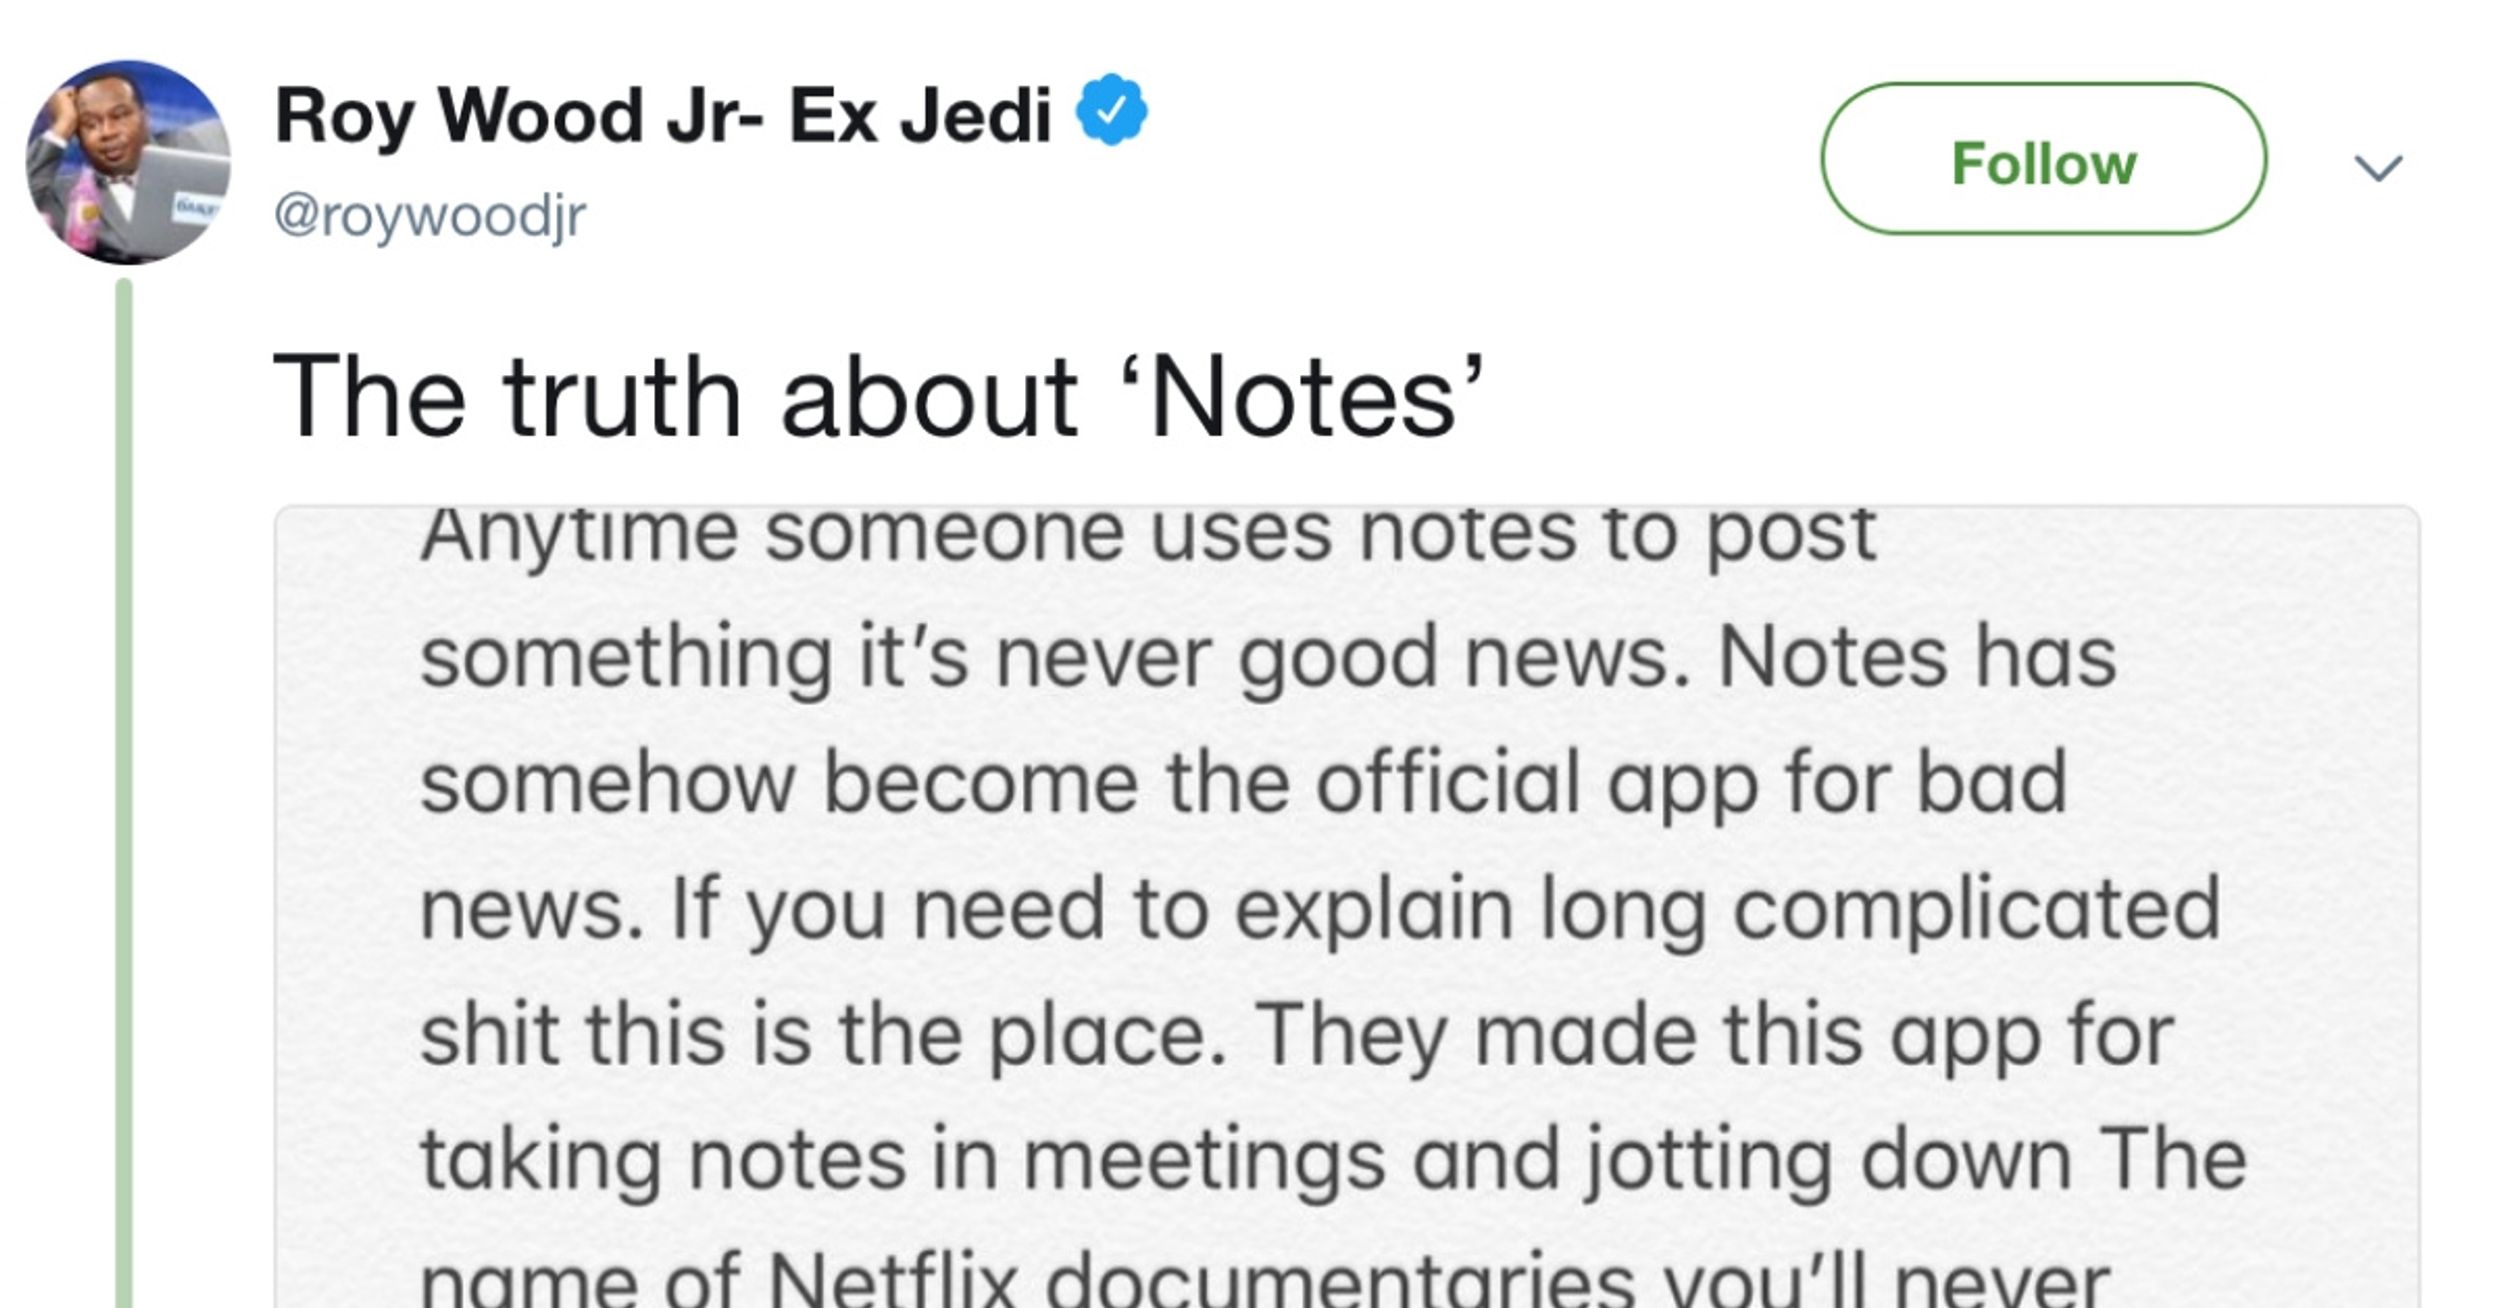 Comedian's Important PSA About The 'Notes' App's Intended Purposes Is On Point 😂